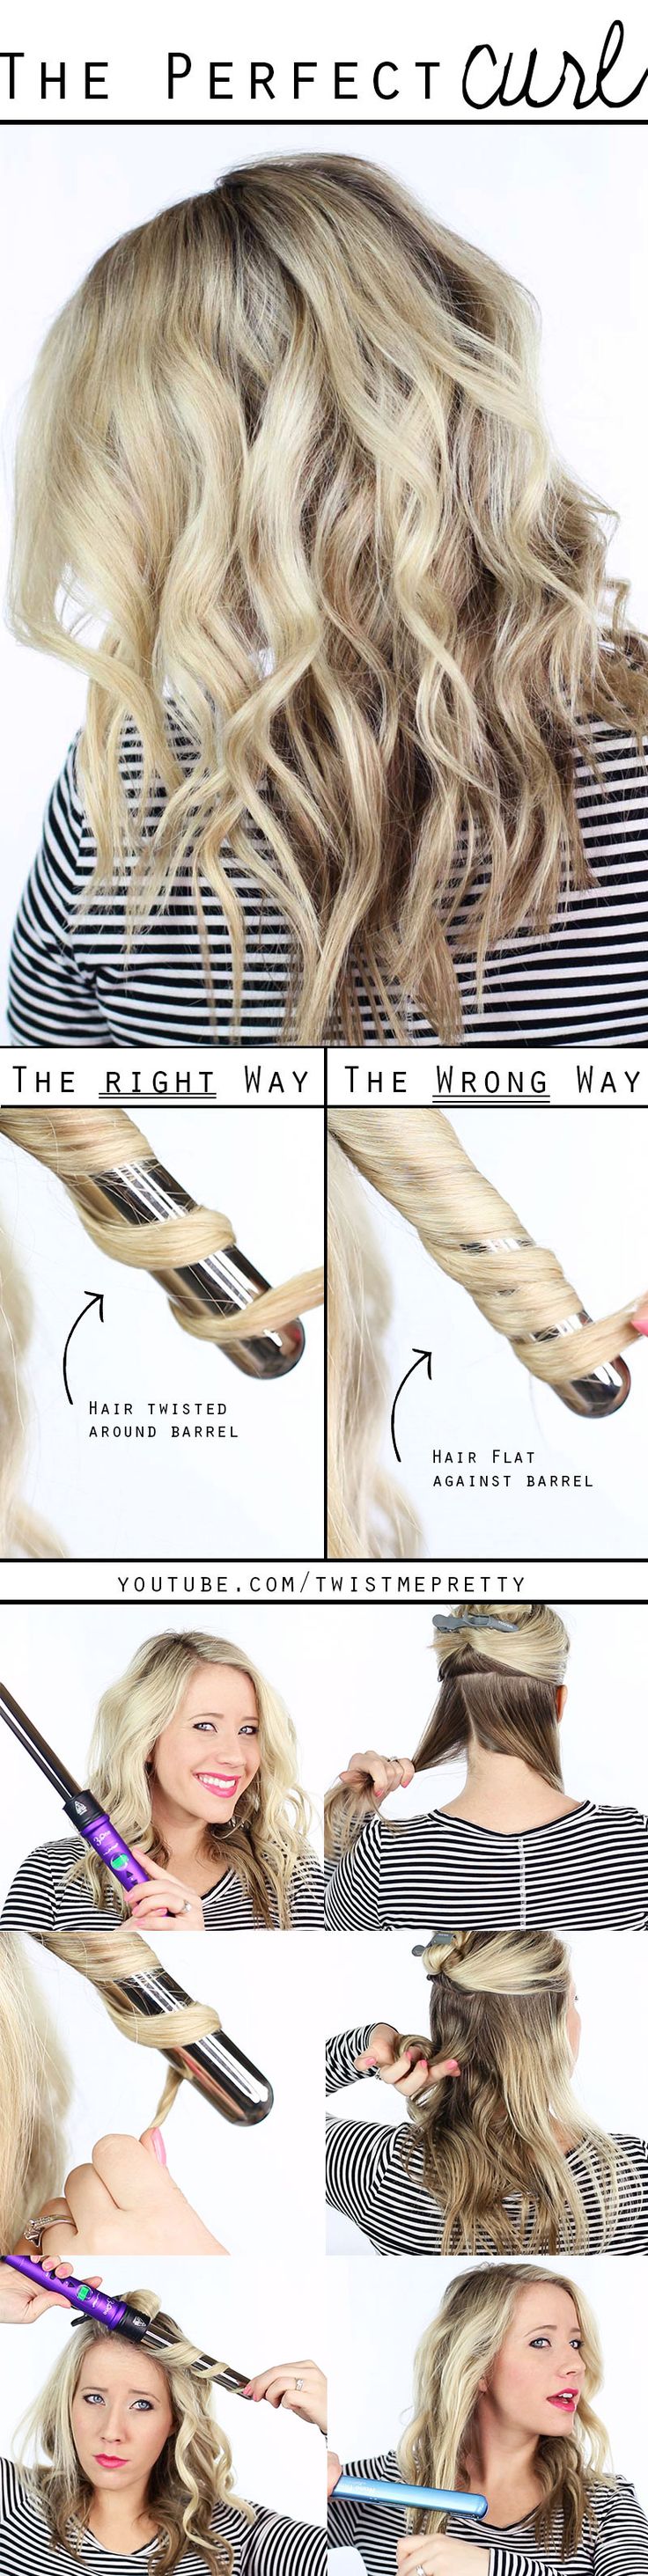 15 super-easy hairstyles for lazy girls with tutorials